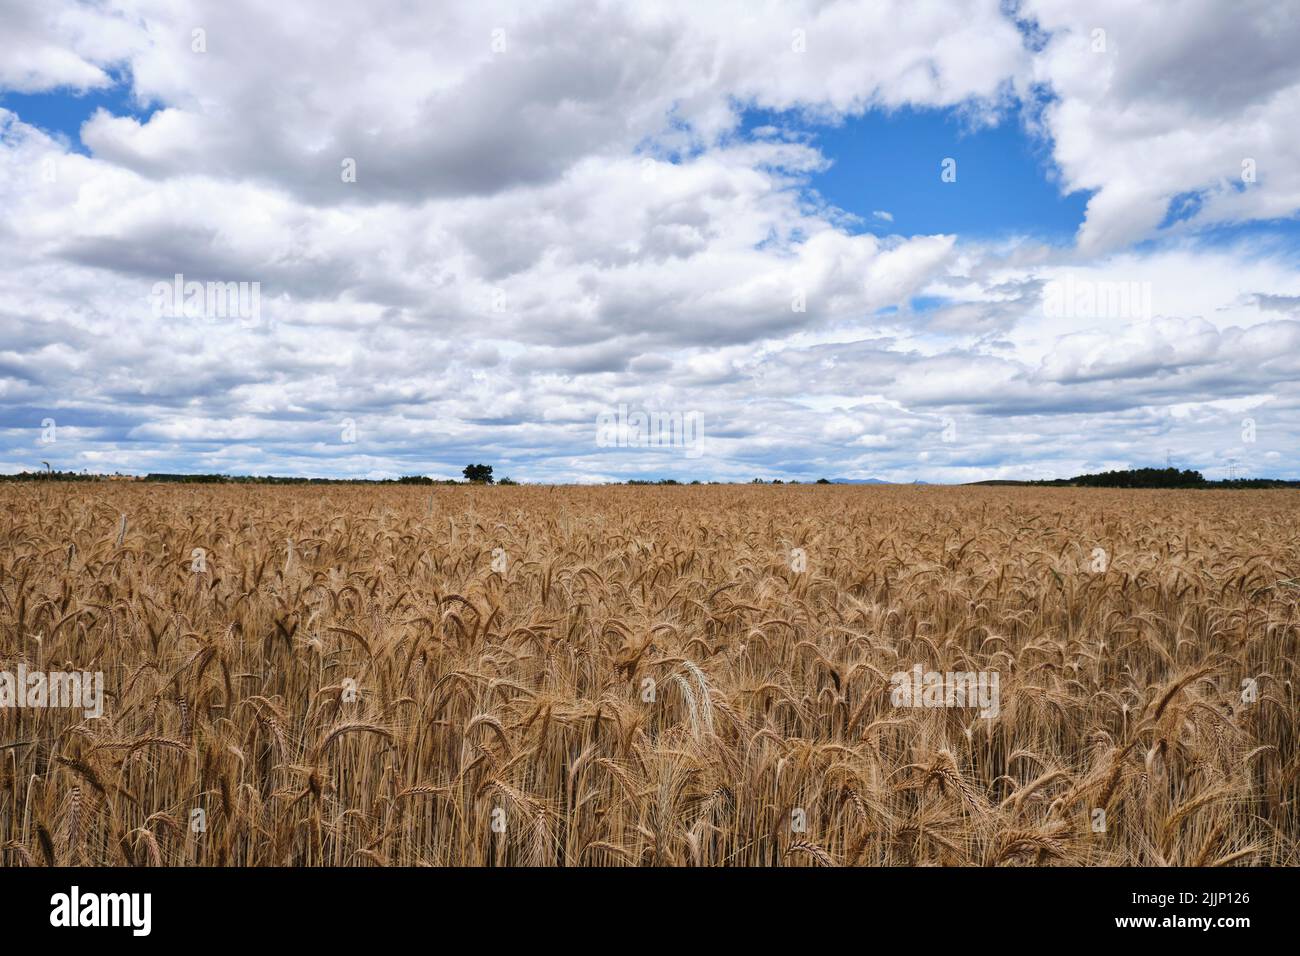 Dry barley field ready for harvest in summer under a blue sky with white clouds Stock Photo